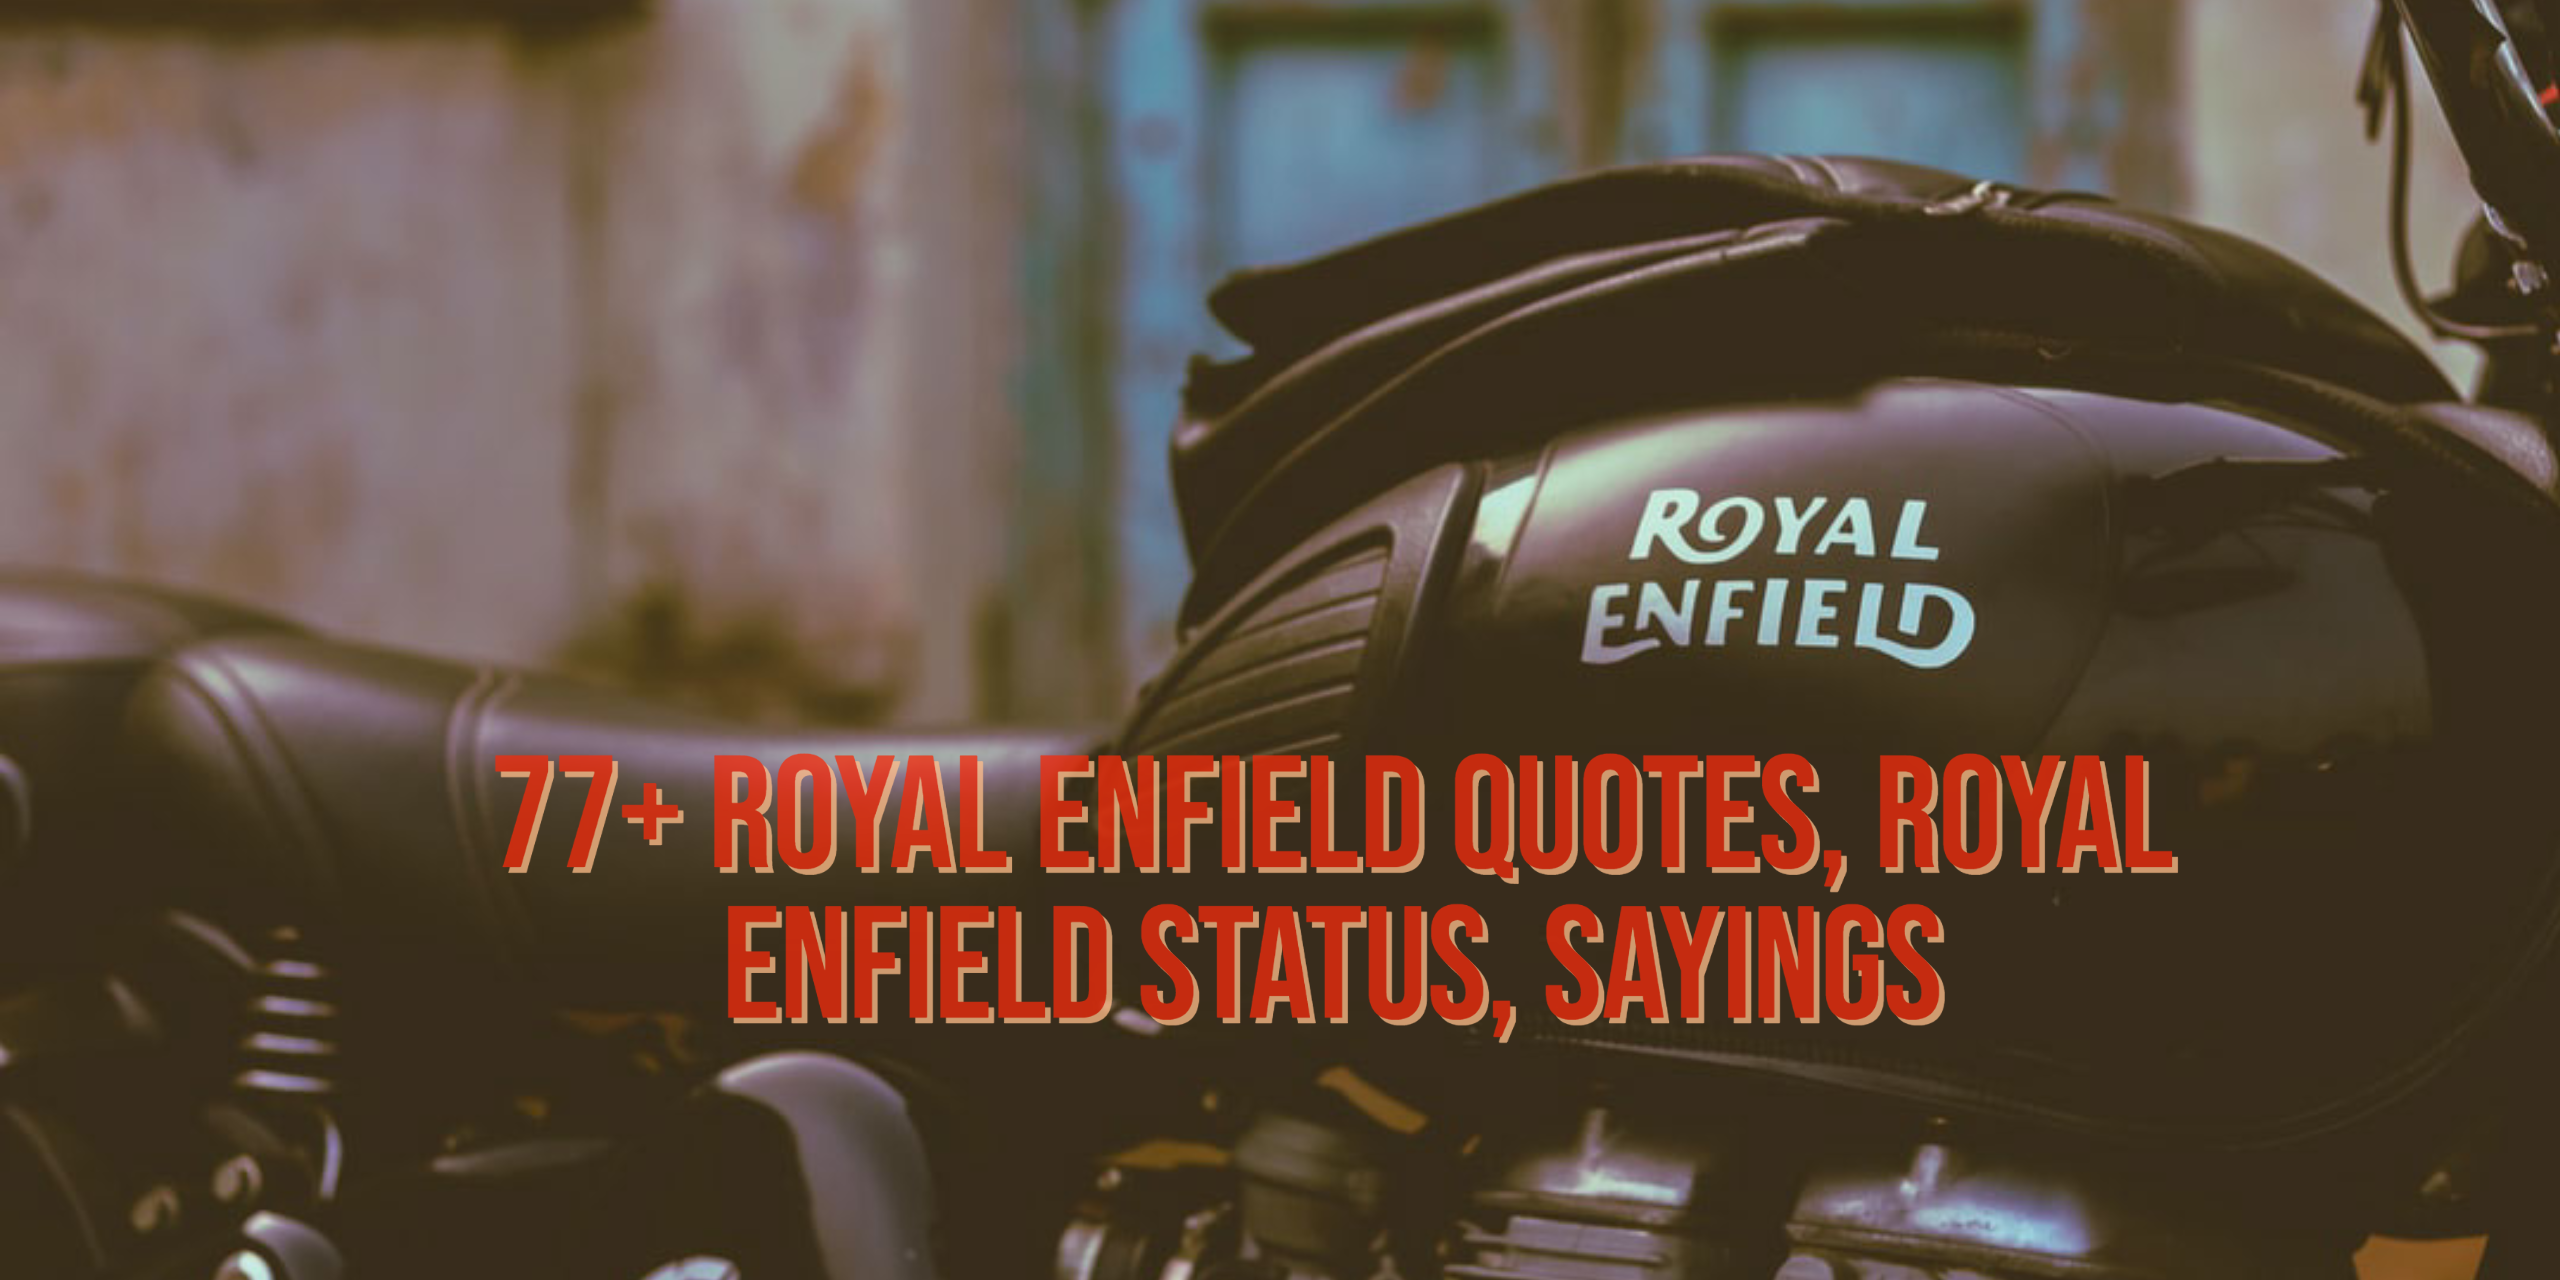 royal enfield quotes for Instagram, royal enfield quotes in hindi, royal enfield quotes in English, royal enfield quotes for facebook, royal enfield quotes for status, royal enfield quotes for instagram in hindi, royal enfield quotes for whatsapp status, royal enfield quotes for instagram post, classy royal enfield quotes for Instagram, about royal enfield quotes, royal enfield attitude quotes, riding royal enfield quotes, royal enfield captions, my royal enfield quotes, royal enfield quotes images, best royal enfield quotes, royal enfield love quotes, royal bullet quotes, royal enfield bike quotes in English, royal enfield with quotes, royal enfield caption, royal enfield bullet captions, royal enfield bullet quotes, royal enfield sayings, royal enfield status quotes, royal enfield bullet caption